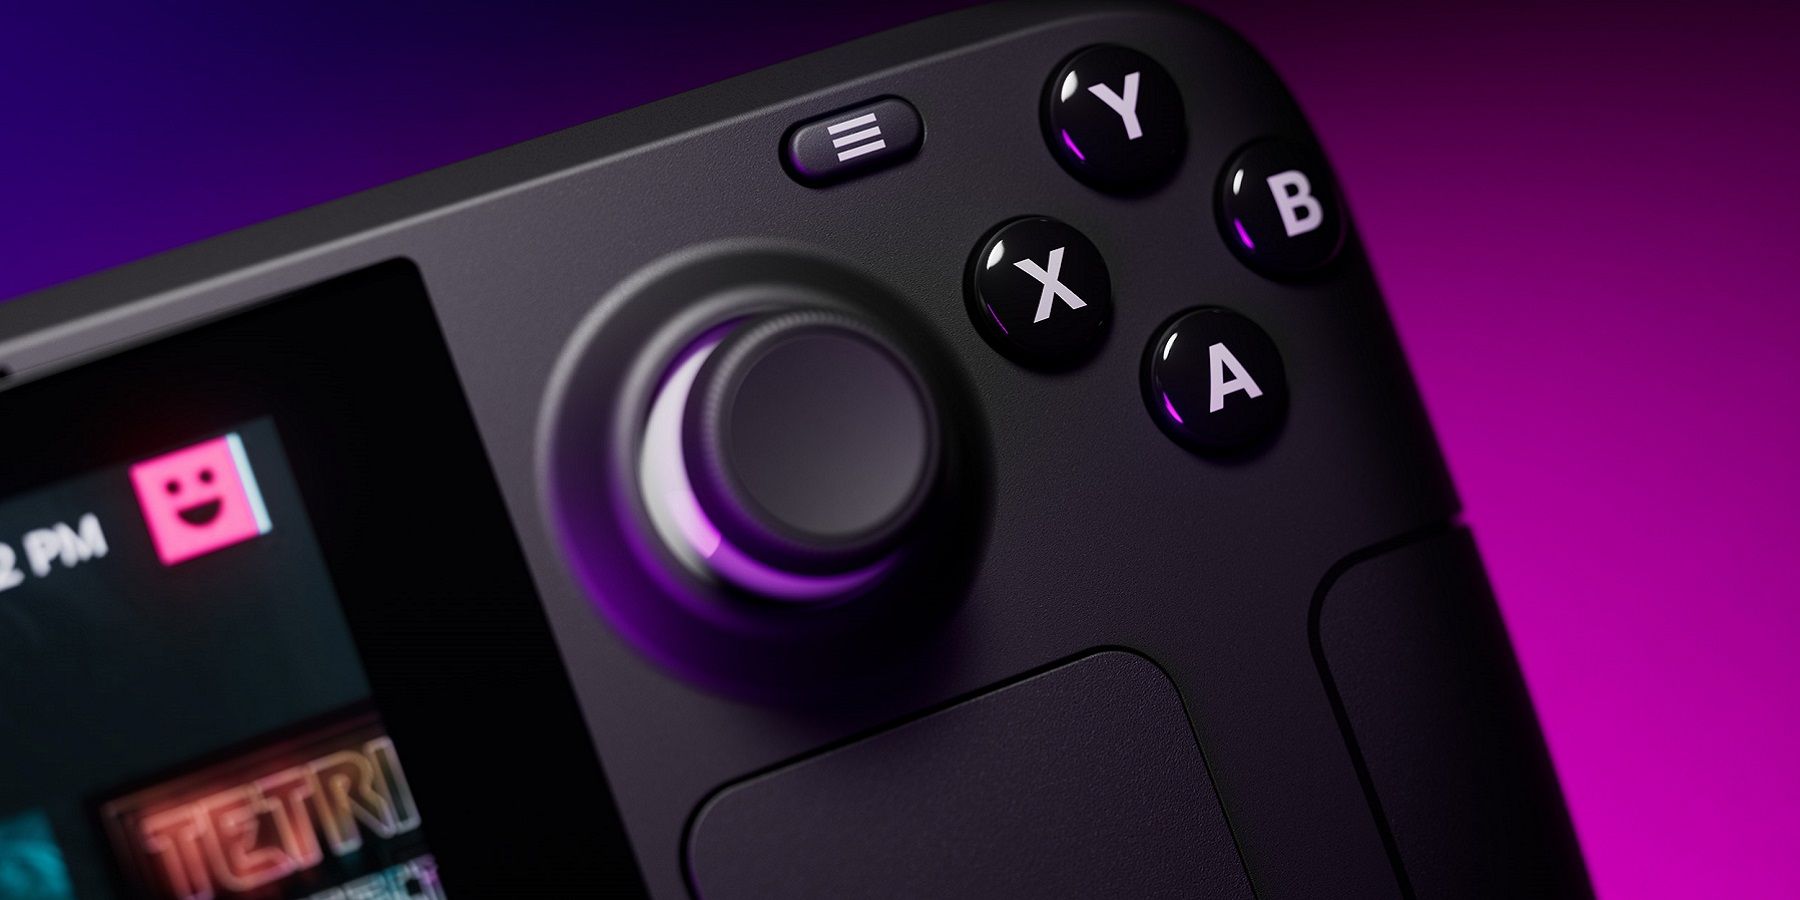 Close-up photo of a Steam Deck showing the right analog stick and right buttons.